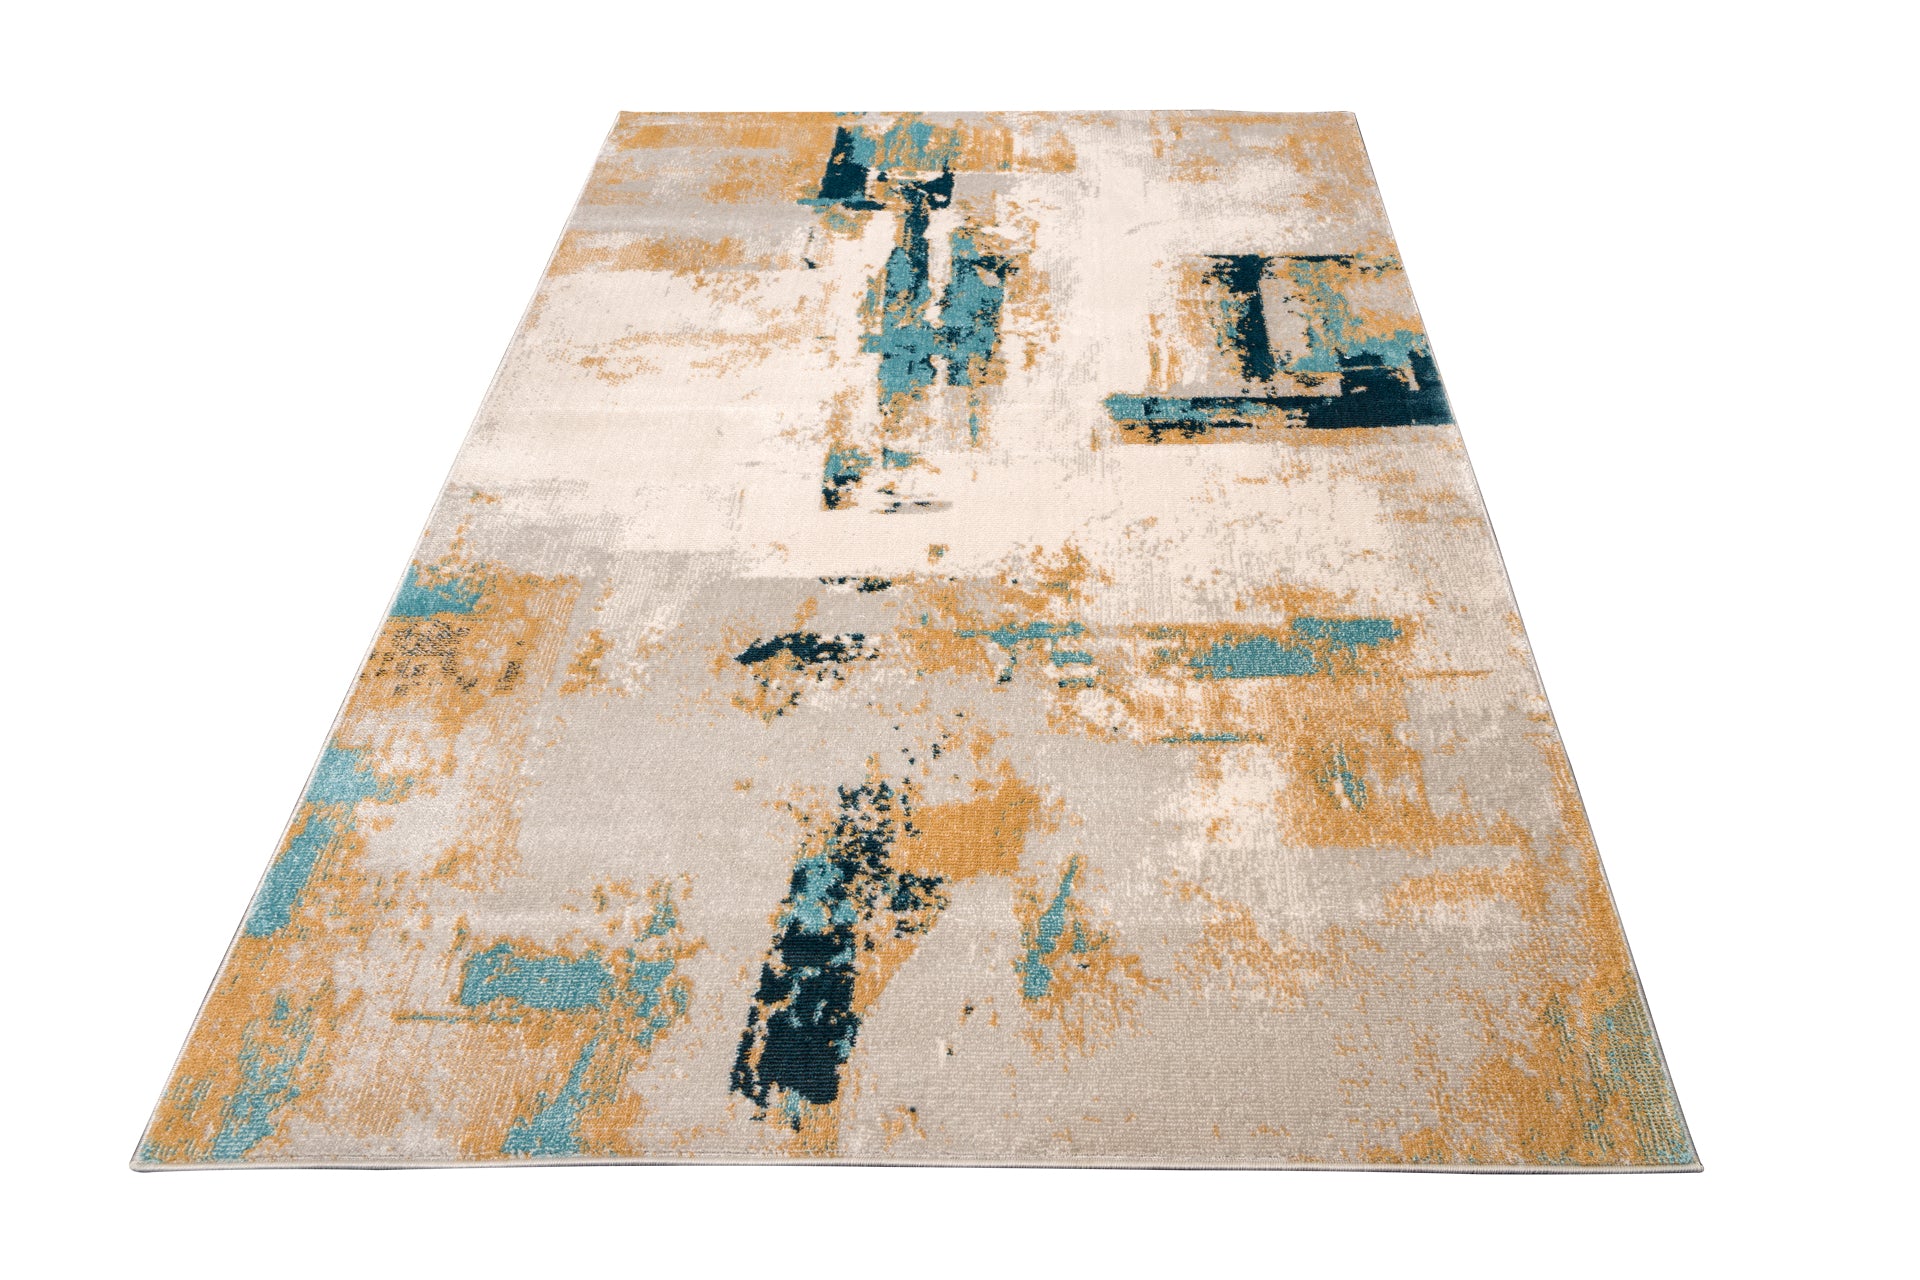 la dole rugs light dark orange turquoise beige rustic pattern abstract modern minimalistic area rug 2x8, 3x10, 2x10 ft Long Runner Rug, Hallway, Balcony, Entry Way, Kitchen, Stairs